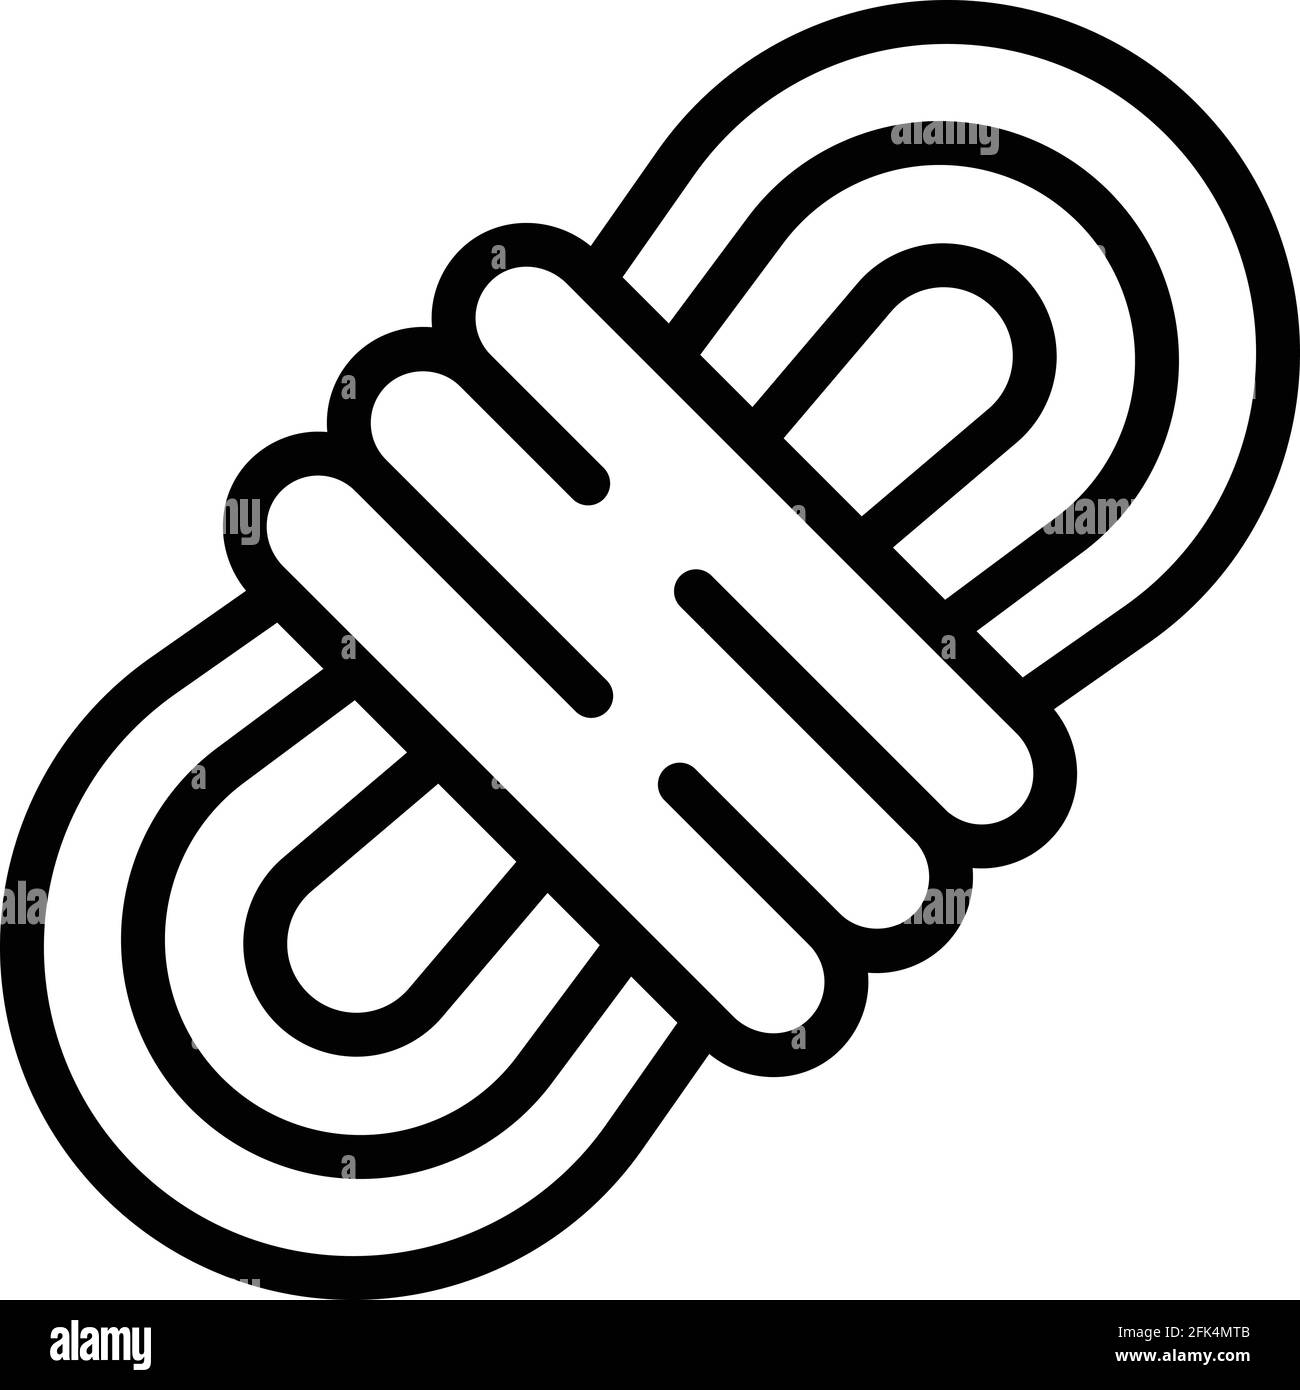 https://c8.alamy.com/comp/2FK4MTB/scouting-rope-icon-outline-scouting-rope-vector-icon-for-web-design-isolated-on-white-background-2FK4MTB.jpg